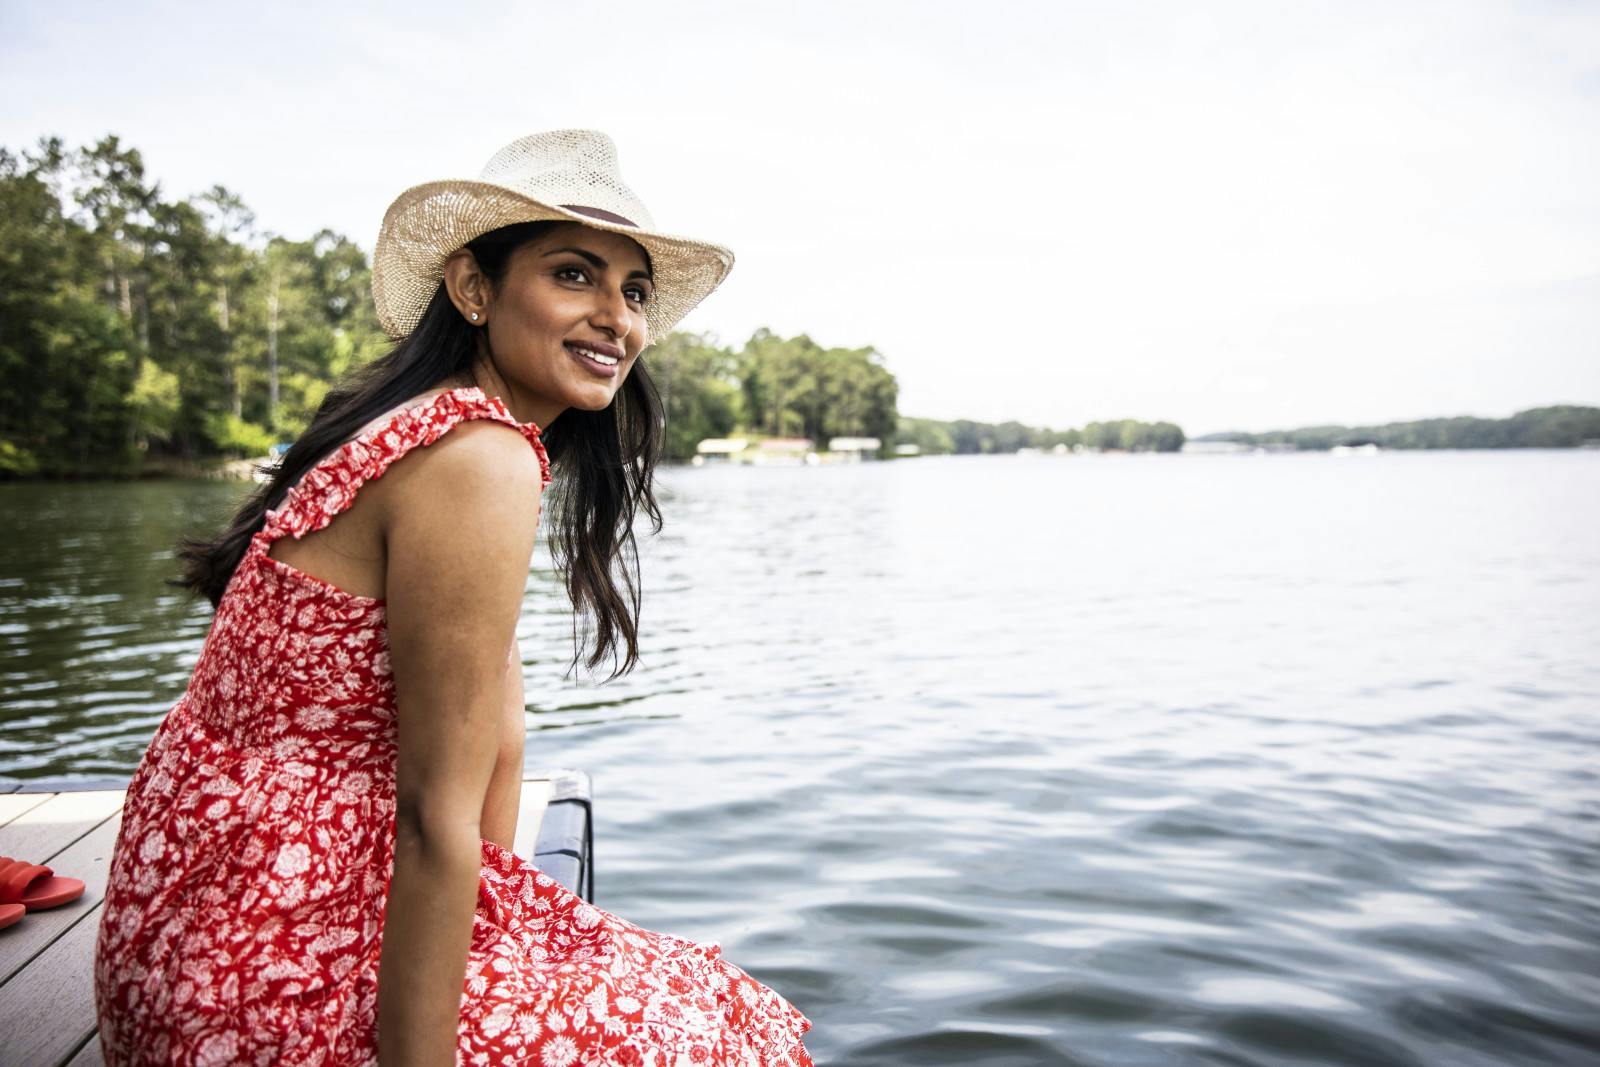 A South Asian woman on a dock (Getty Images)